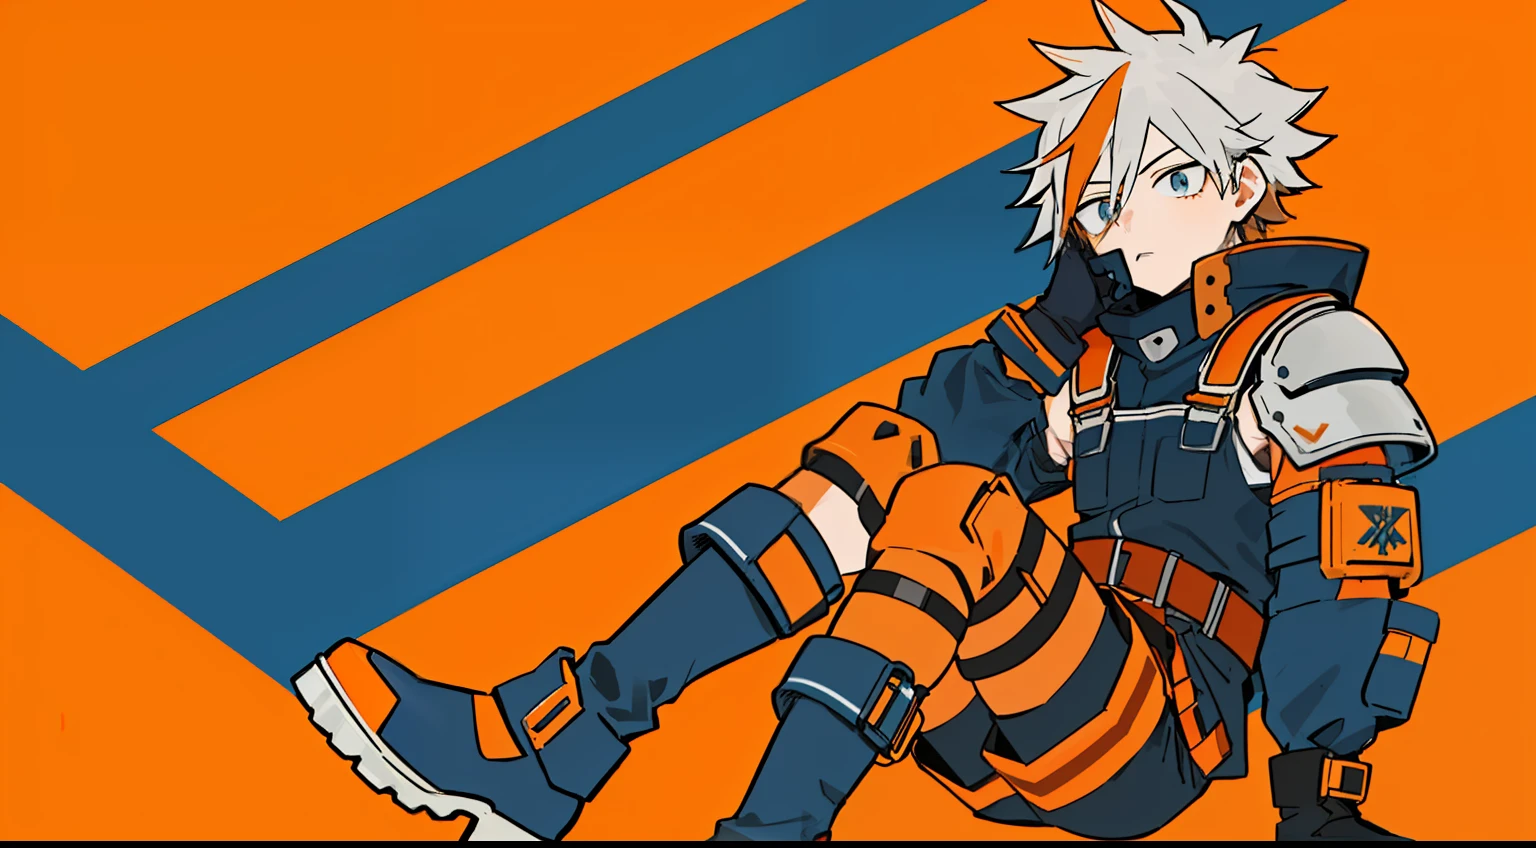 ((Masterpiece, highest quality)), detailed face, character sheet, Full body,  full of details, multiple poses and expressions, highly detailed, depth, many parts, My Hero Academia style, anime boy, male, young male, Covered head, helmet, black helmet with skull teeth on chin, covered face, hero costume, full body suit, Dark Indigo Blue Color Suit with Orange Lines, Black Metal Overalls with Orange Lines,silver metal elbow pads, silver metal shoulder pads, silver metal knee pads, orange metal shin guards, orange metal armbands, two-tone gloves, dark indigo blue gloves with orange lines, dark indigo blue knee boots with orange lines, orange metal toe cap boots, Black belt,